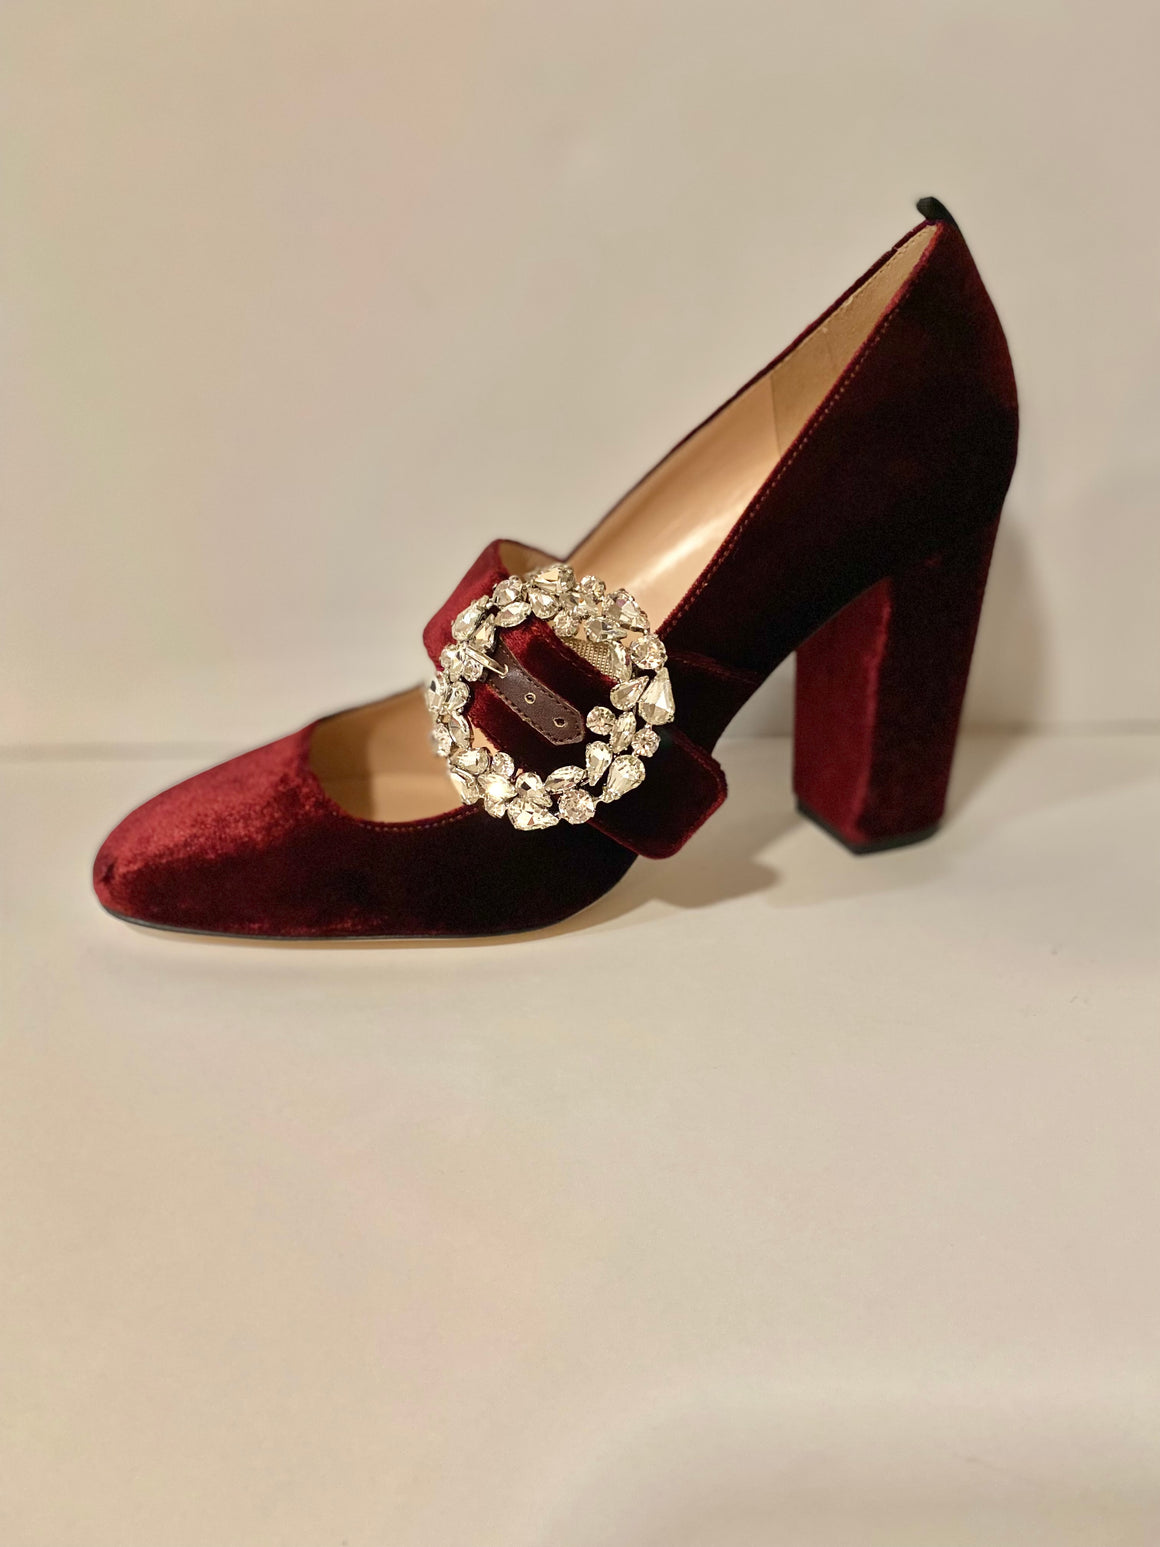 Celine Heel Red Velvet- 100% Max & Riley Exclusive-Shoes-SJP Collection-Max & Riley